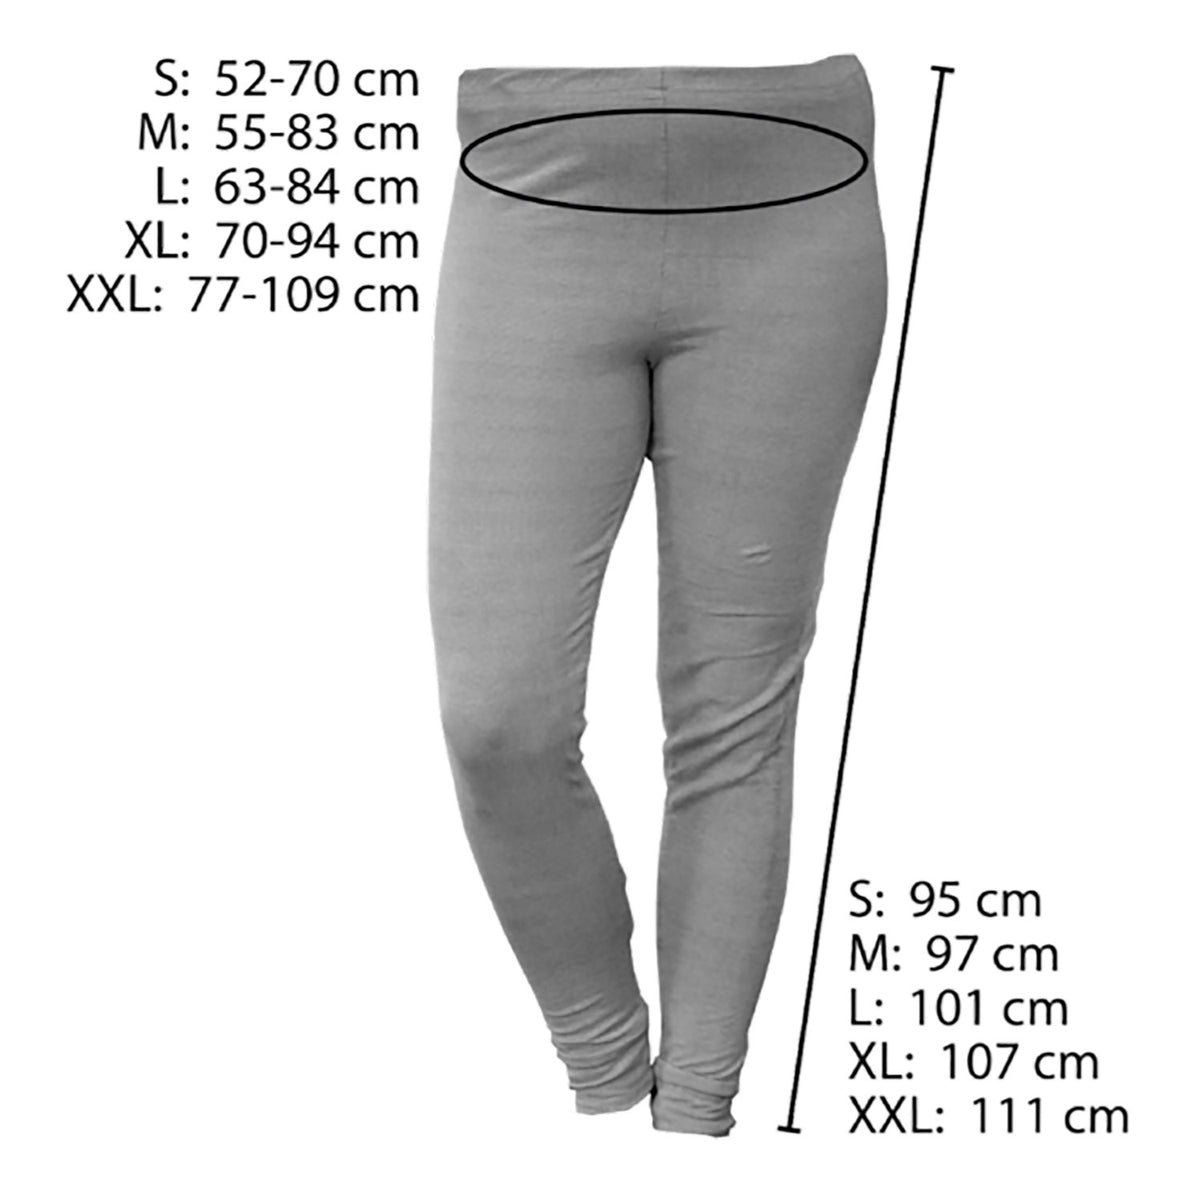 SILVER-ELASTIC Pants for Shielding High Frequency EMF (1 piece)